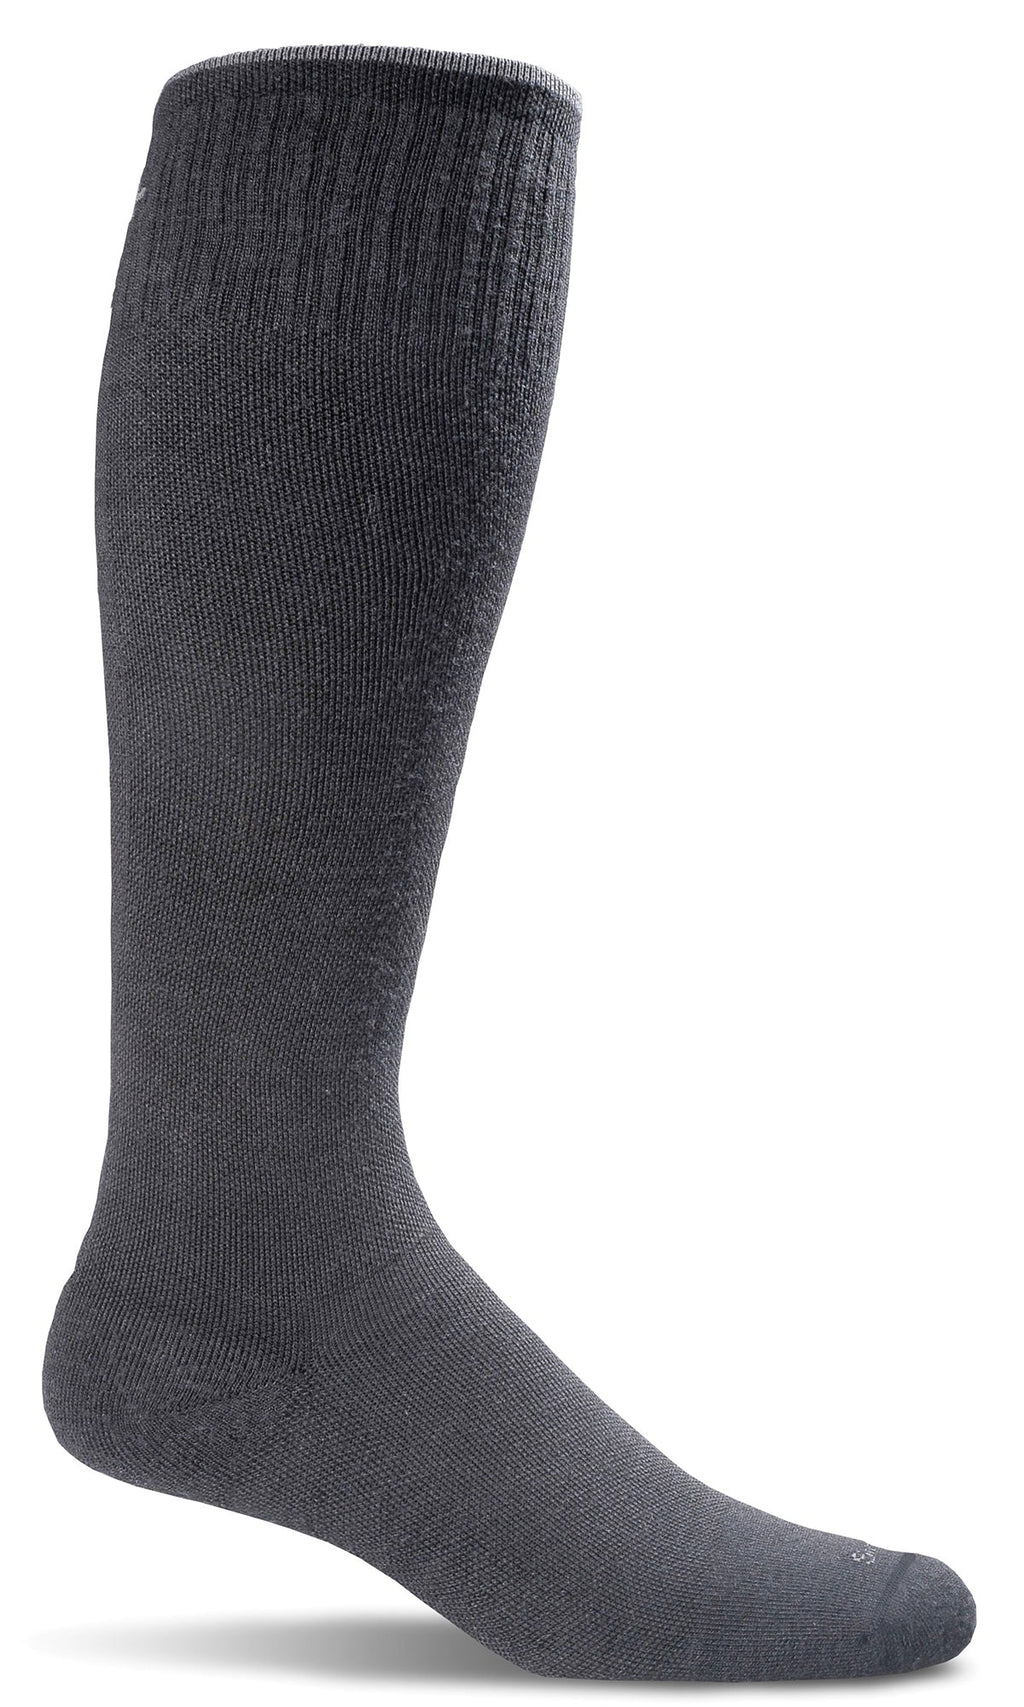 Women's Full Floral | Moderate Graduated Compression Socks - Merino Wool Lifestyle Compression - Sockwell